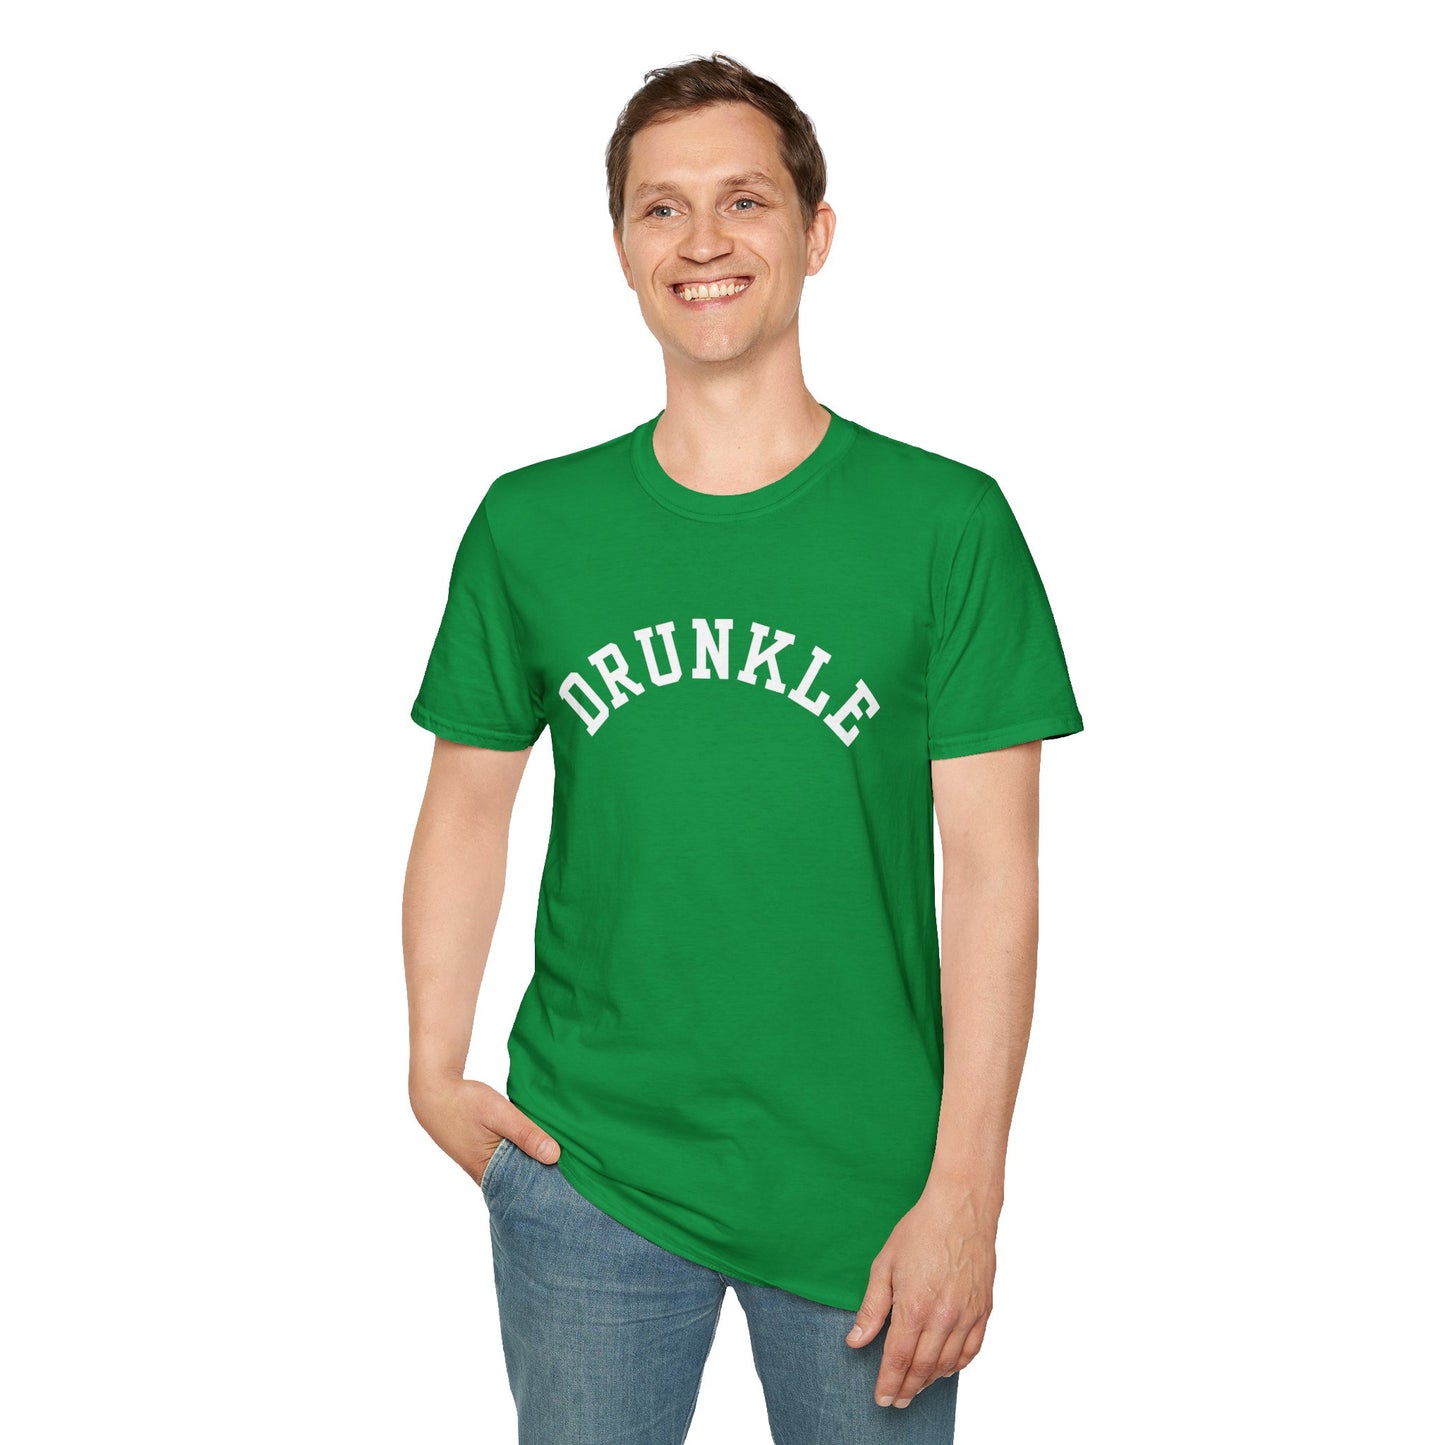 DRUNKLE T-SHIRT